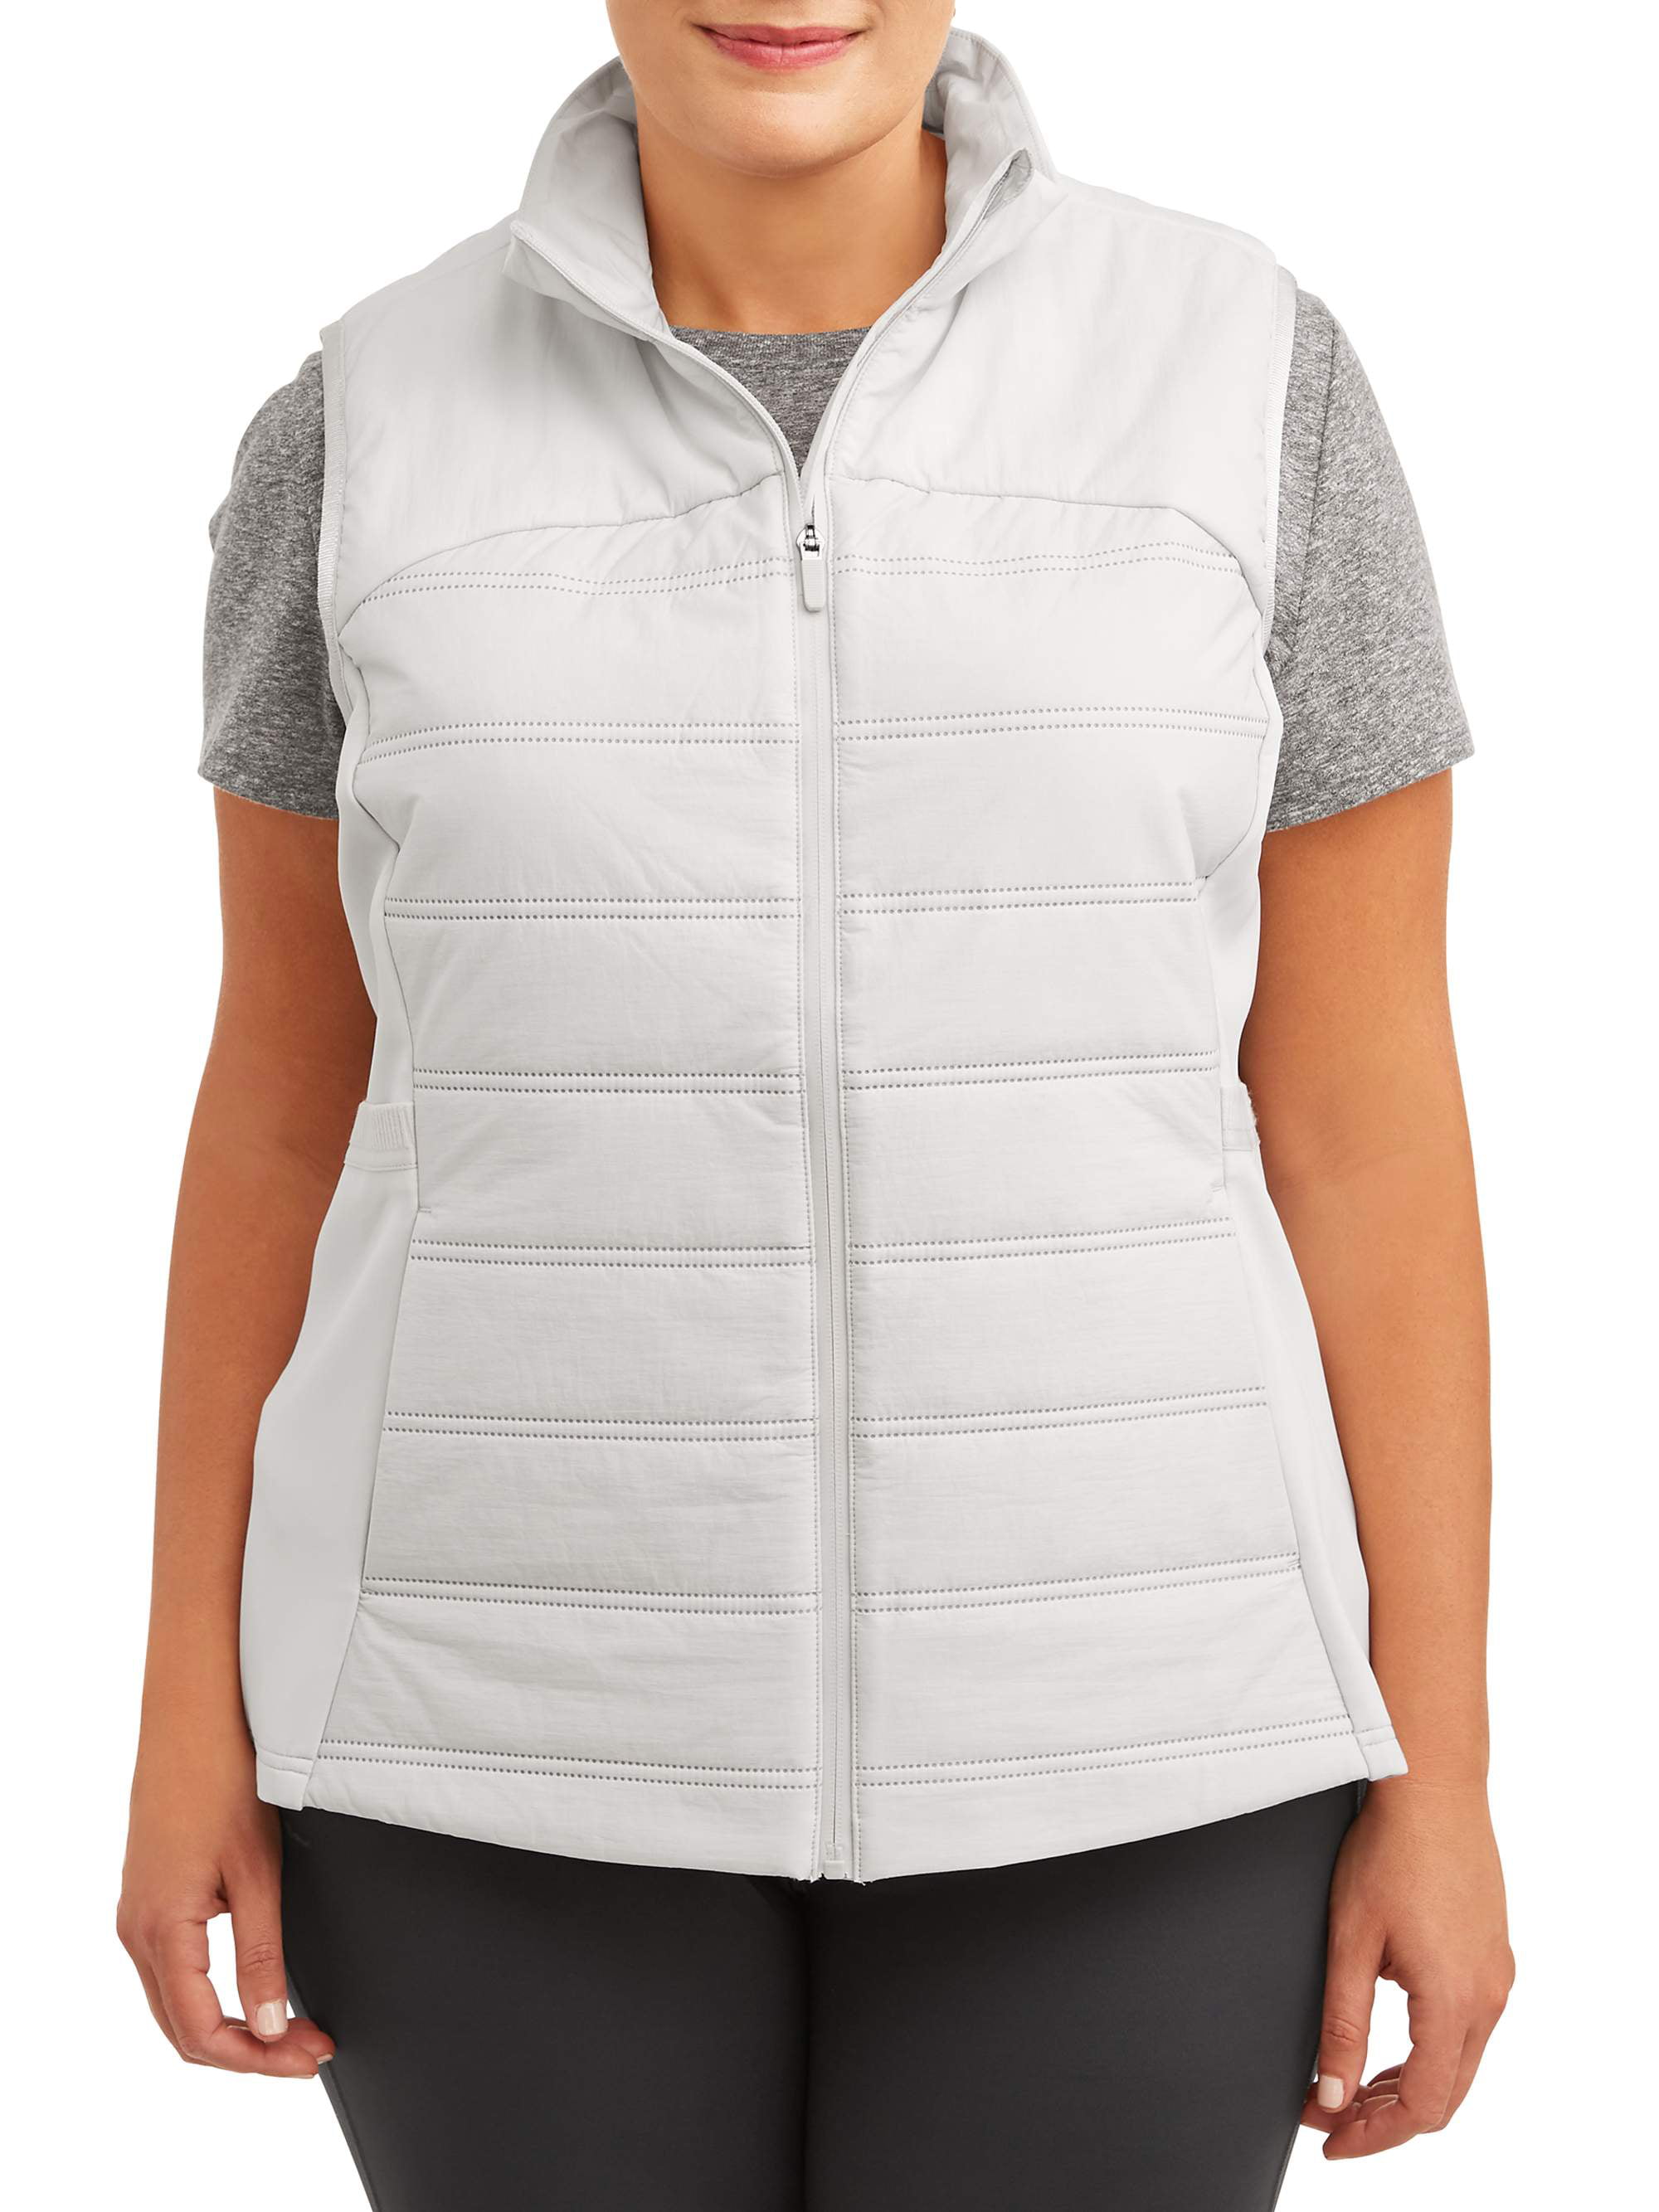 Avia Women's Plus Size Active Lightweight Quilted Vest with Pockets